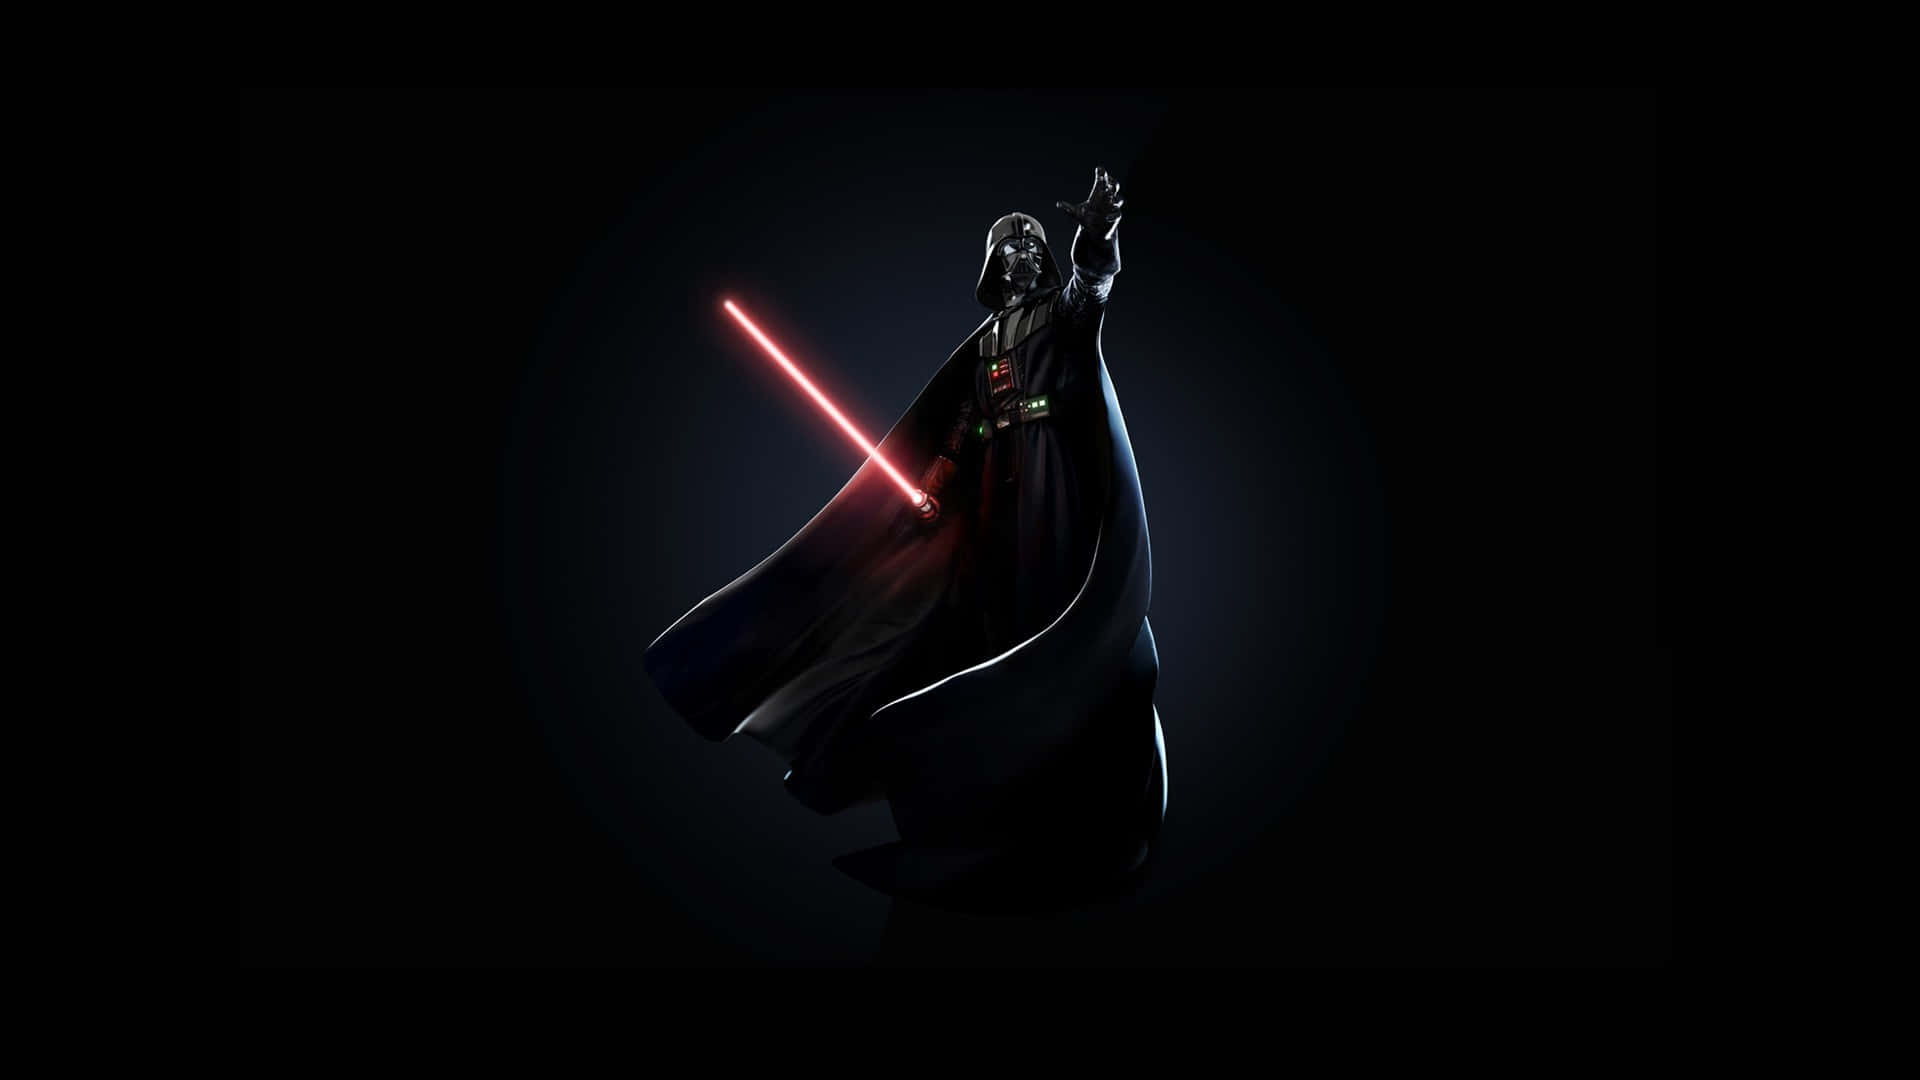 Epic Lightsaber Duel between Jedi and Sith Wallpaper